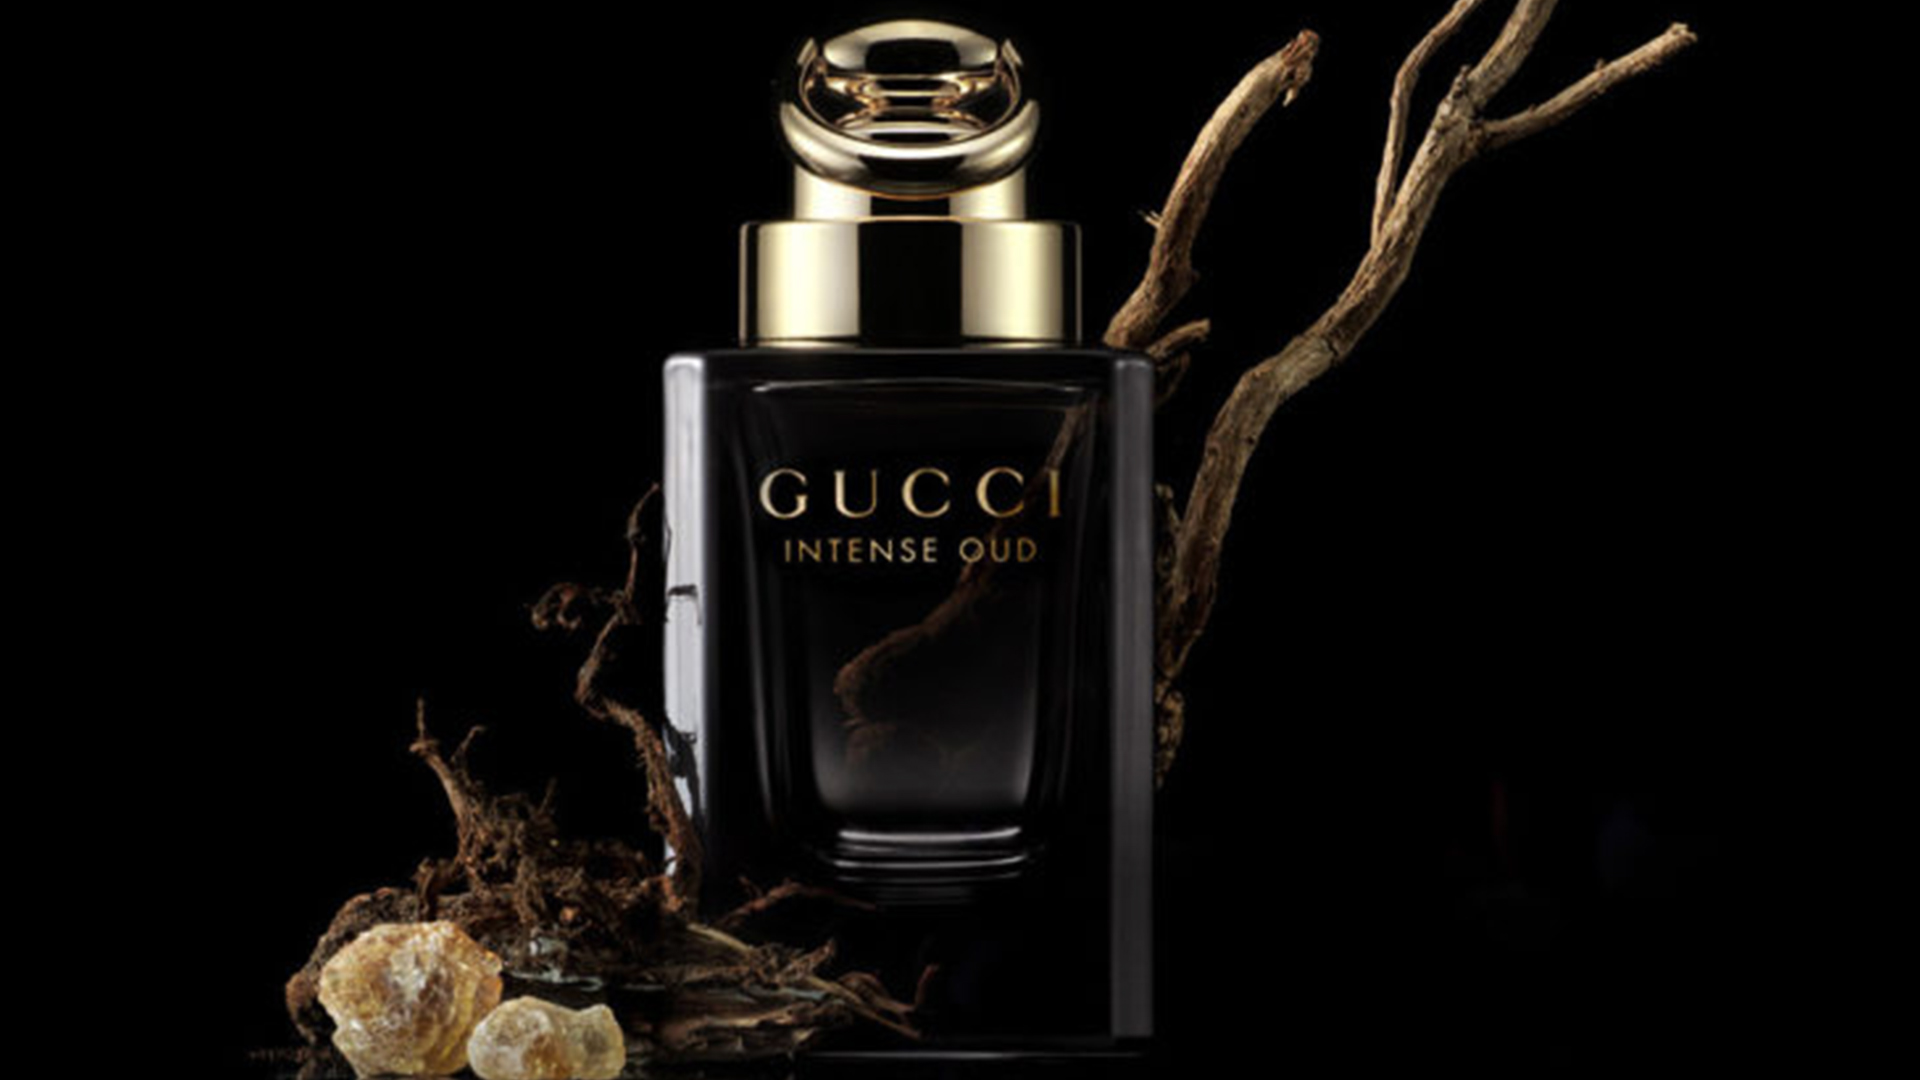 Gucci - Intense Oud » Reviews & Perfume Facts